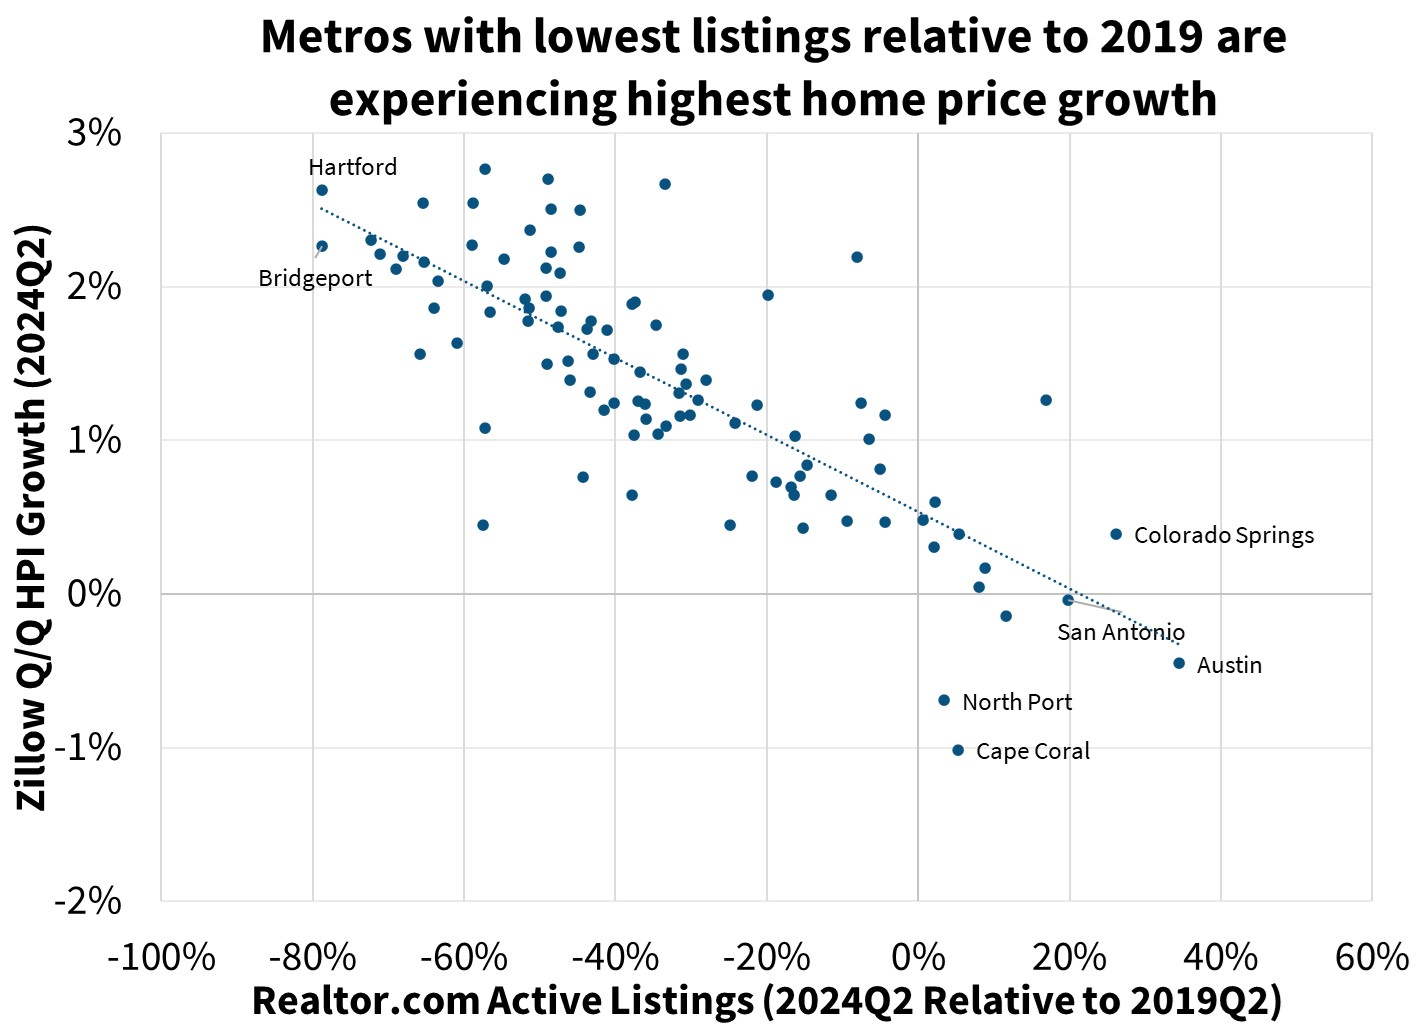 Metros with lowest listings relative to 2019 are experiencing highest home price growth